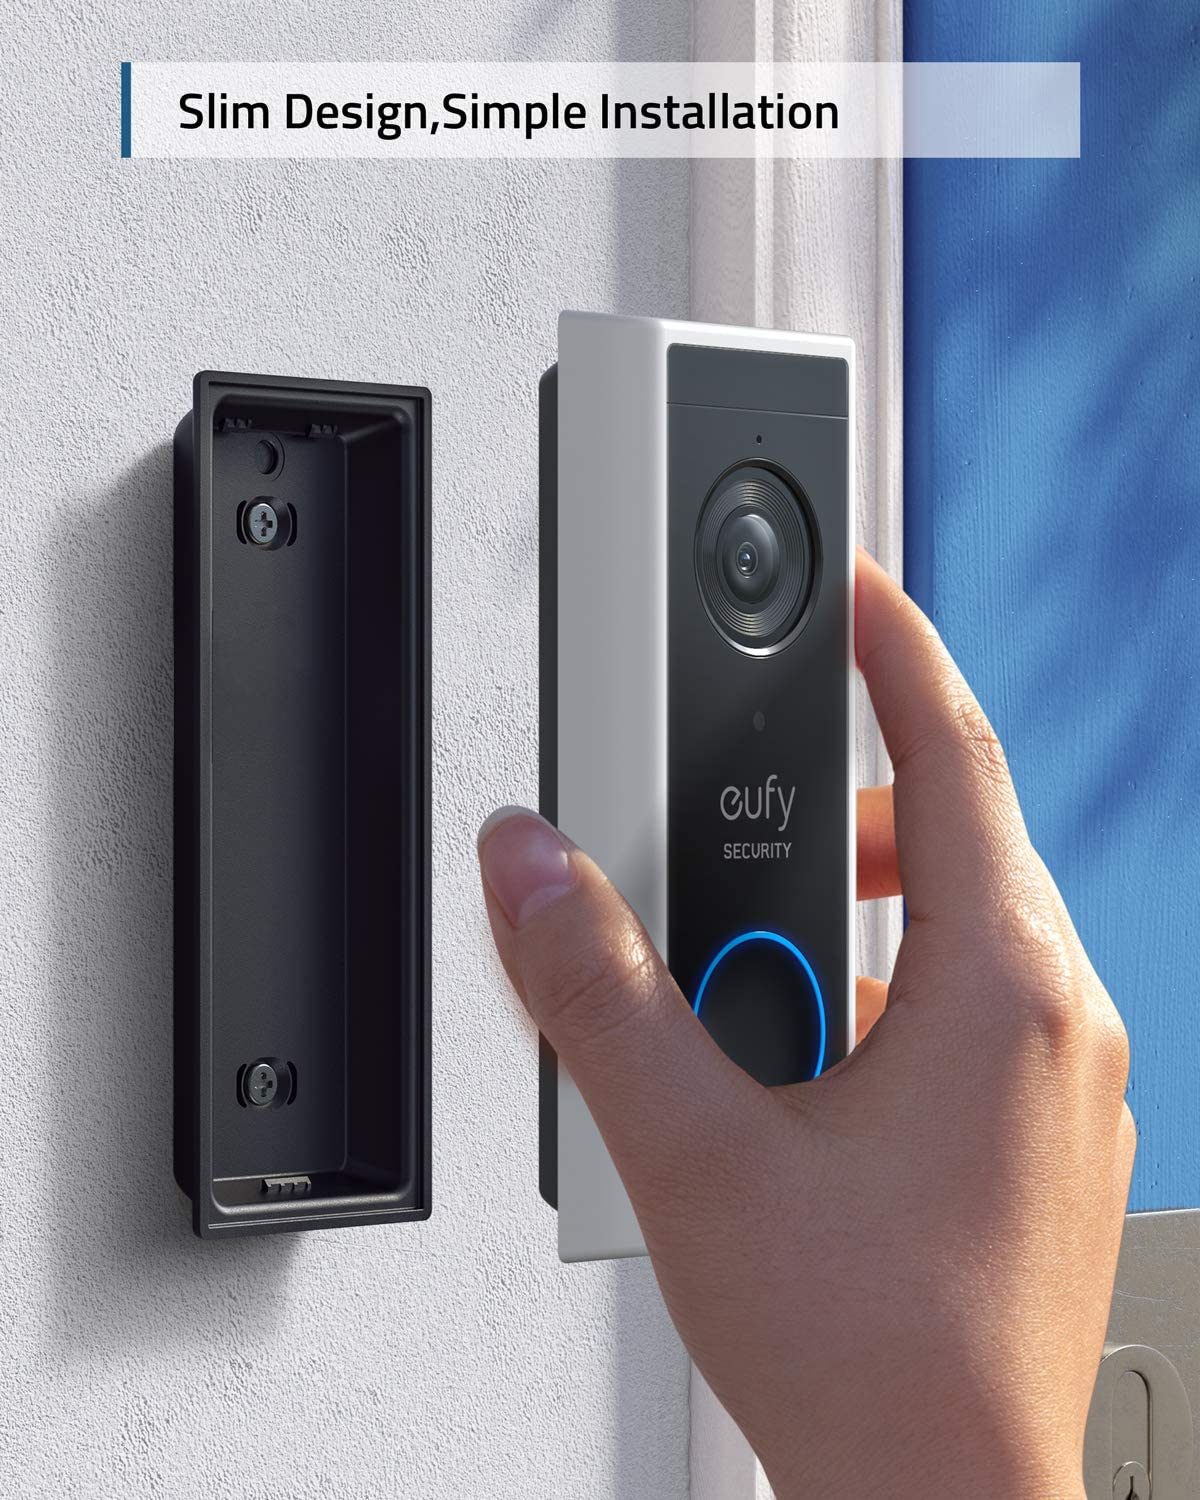 Eufy Battery-Powered Video Doorbell On Sale for 33% Off [Deal]